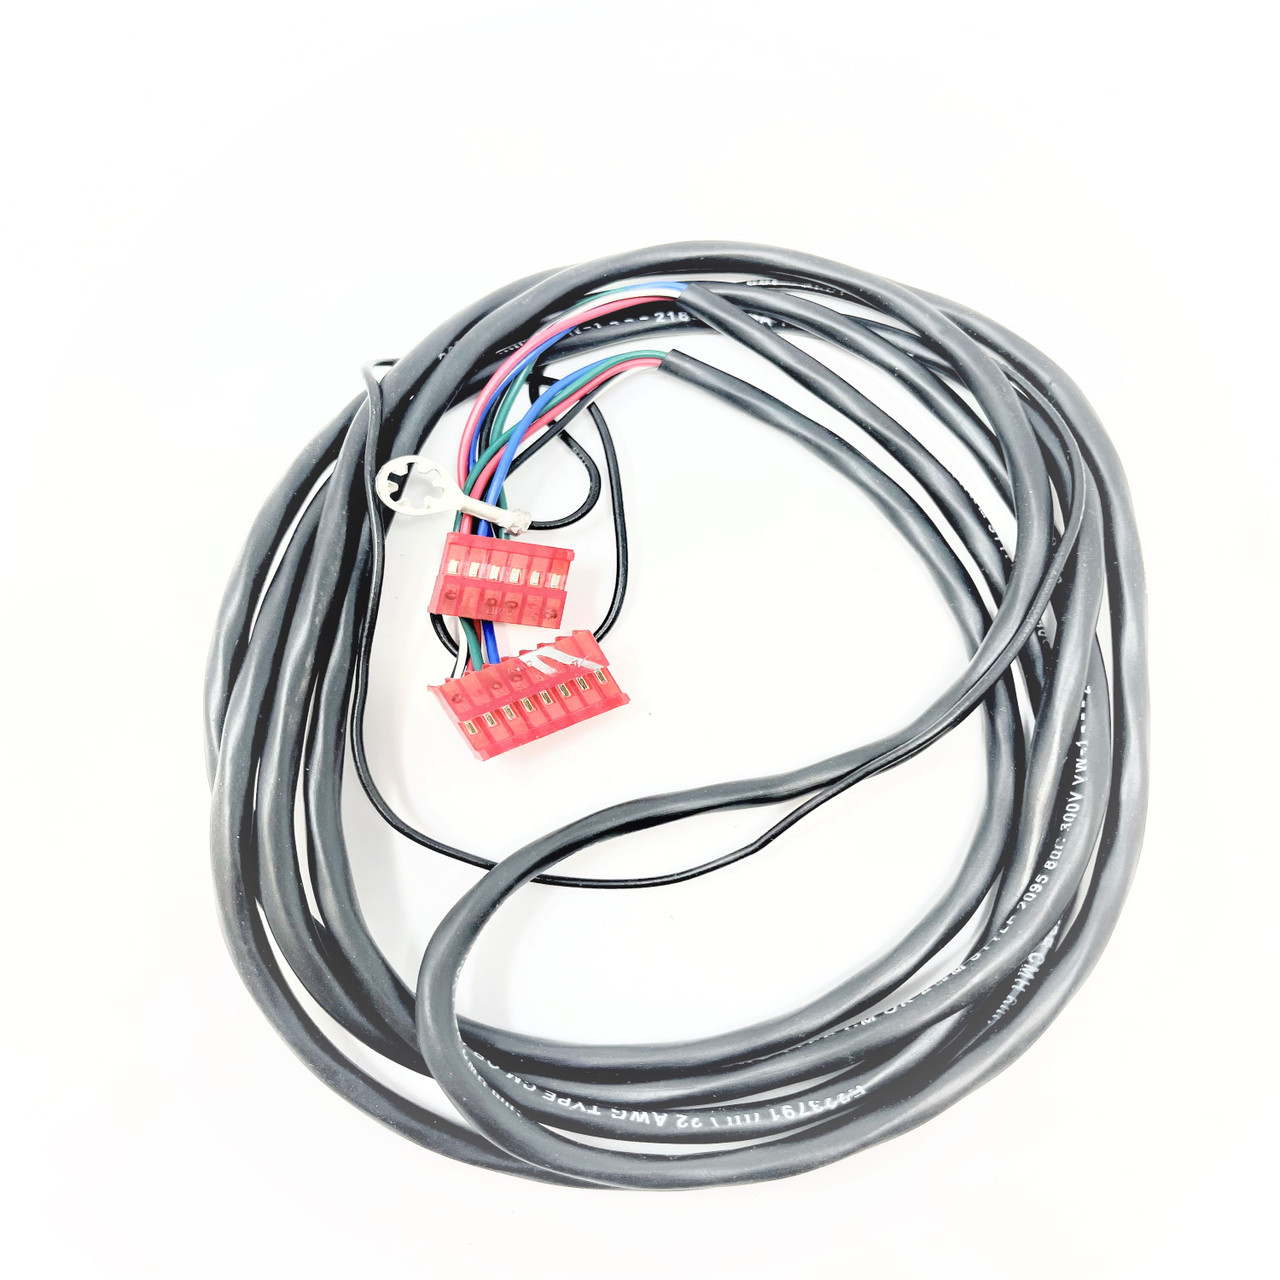 Treadmill Wire Harness Part Number 237009